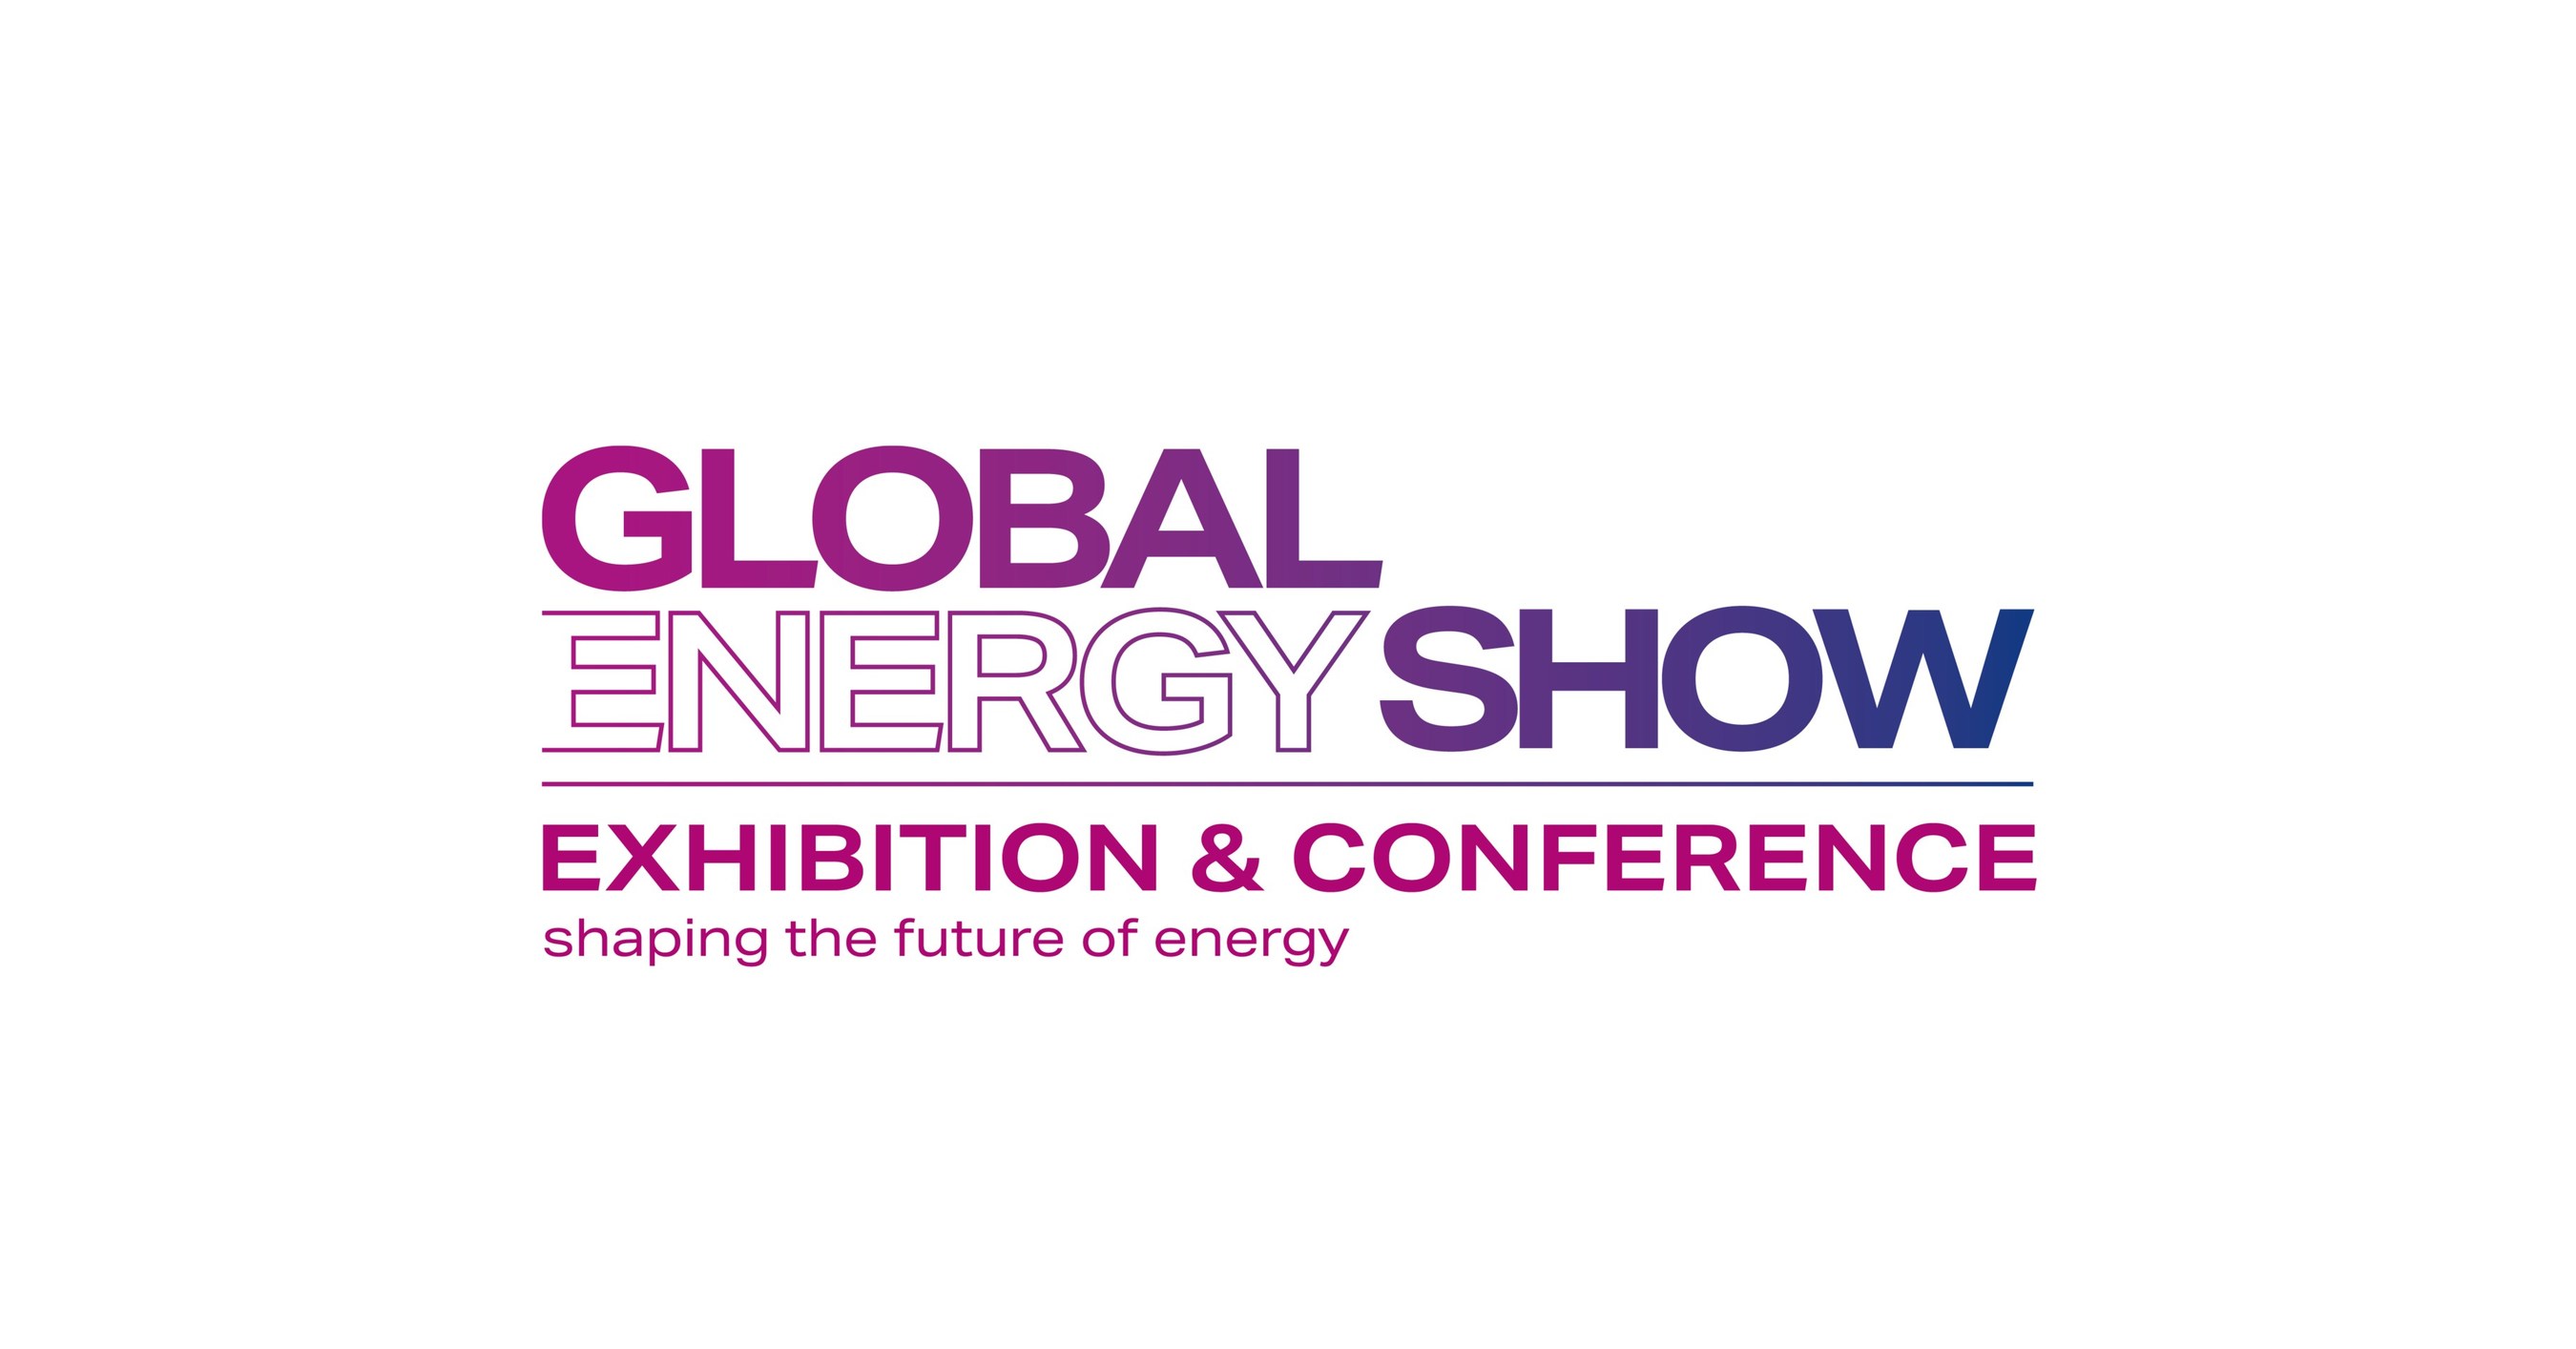 Global Petroleum Show Unveils New NameGlobal Energy Showto Reflect